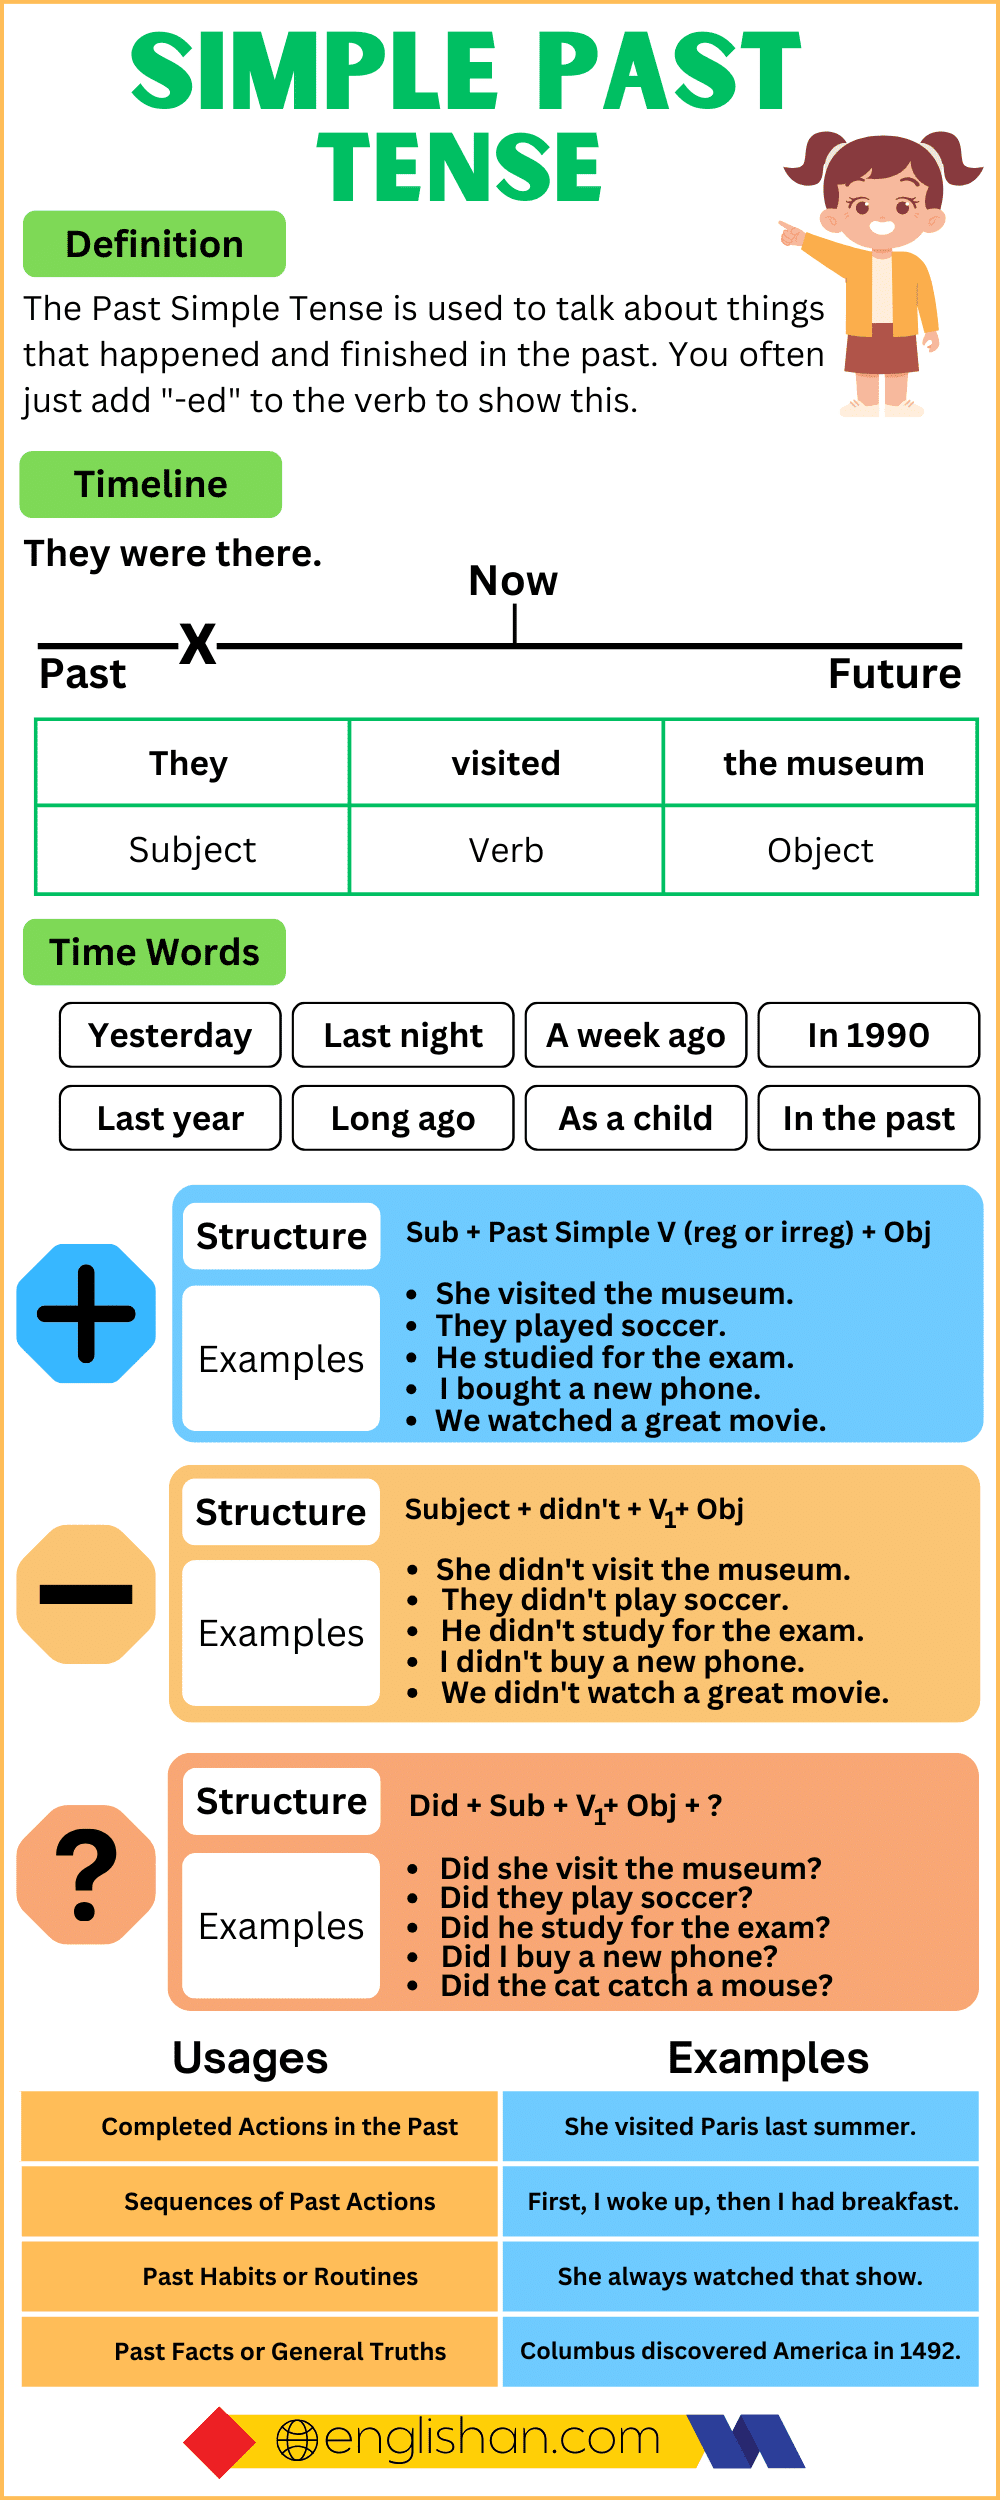 Simple Past Indefinite Tense- Examples, Formula, Exercise, Rules